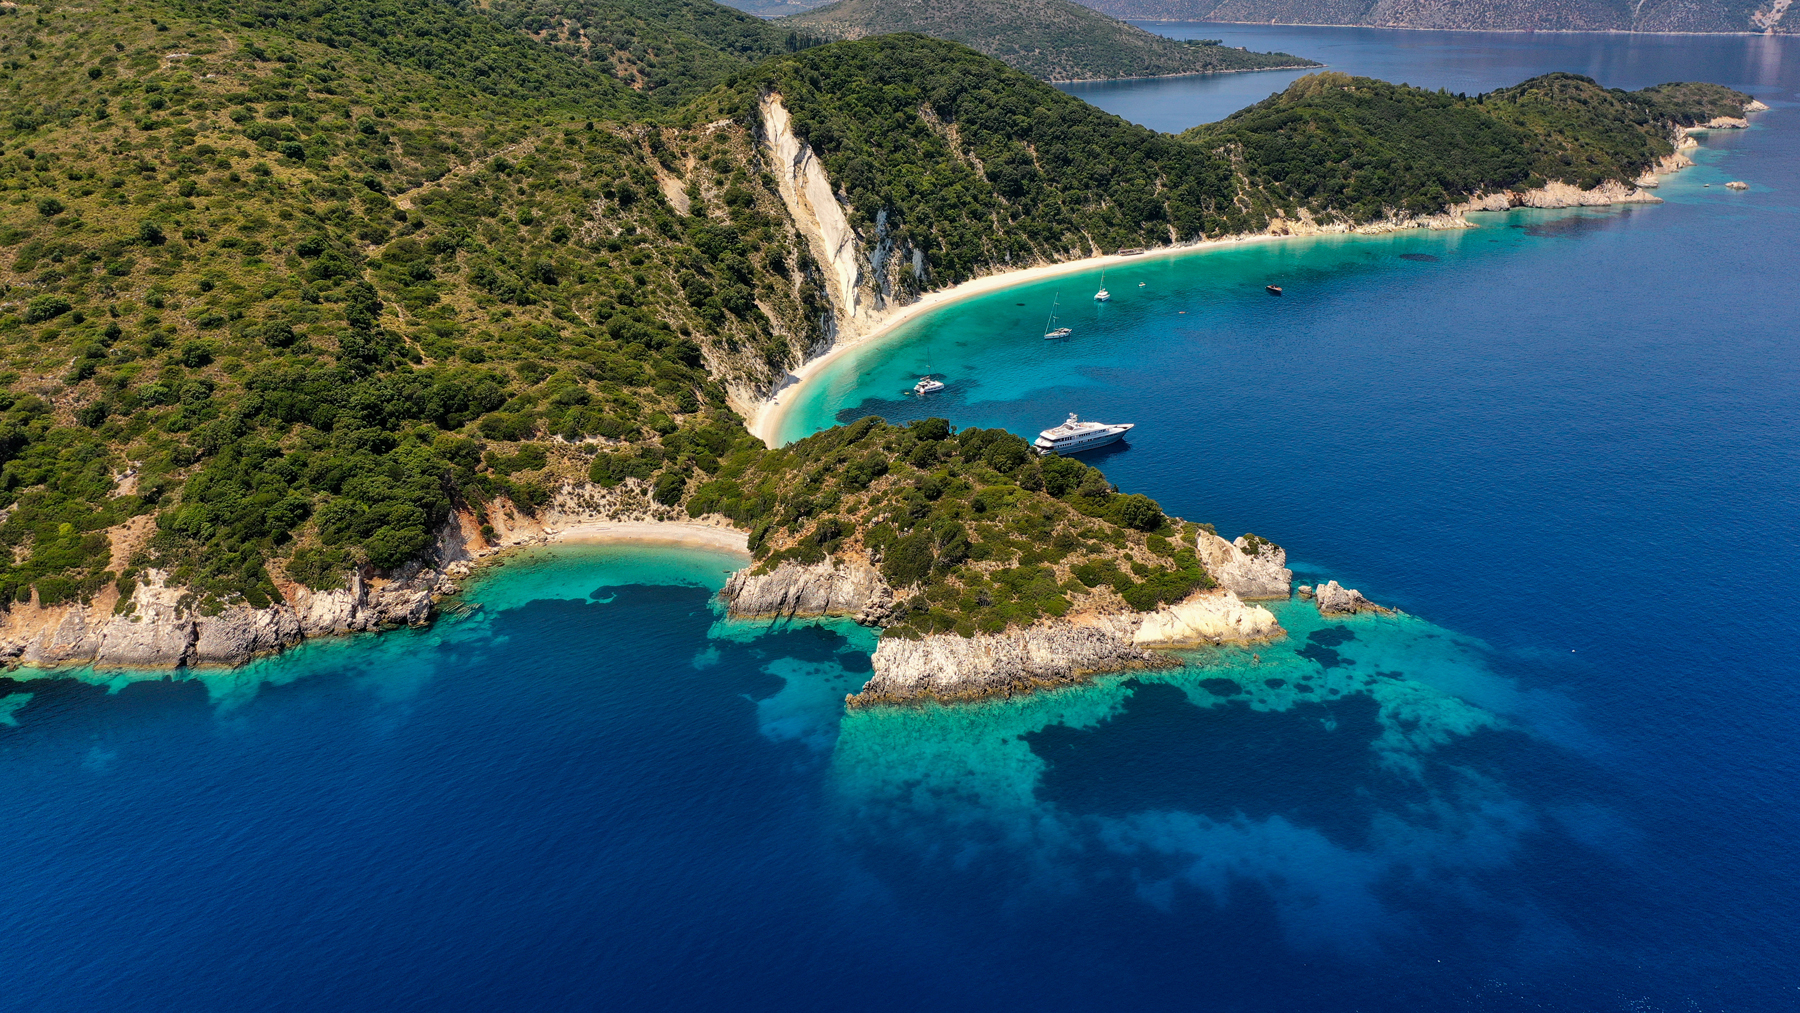 Ionian Sea yacht rental available